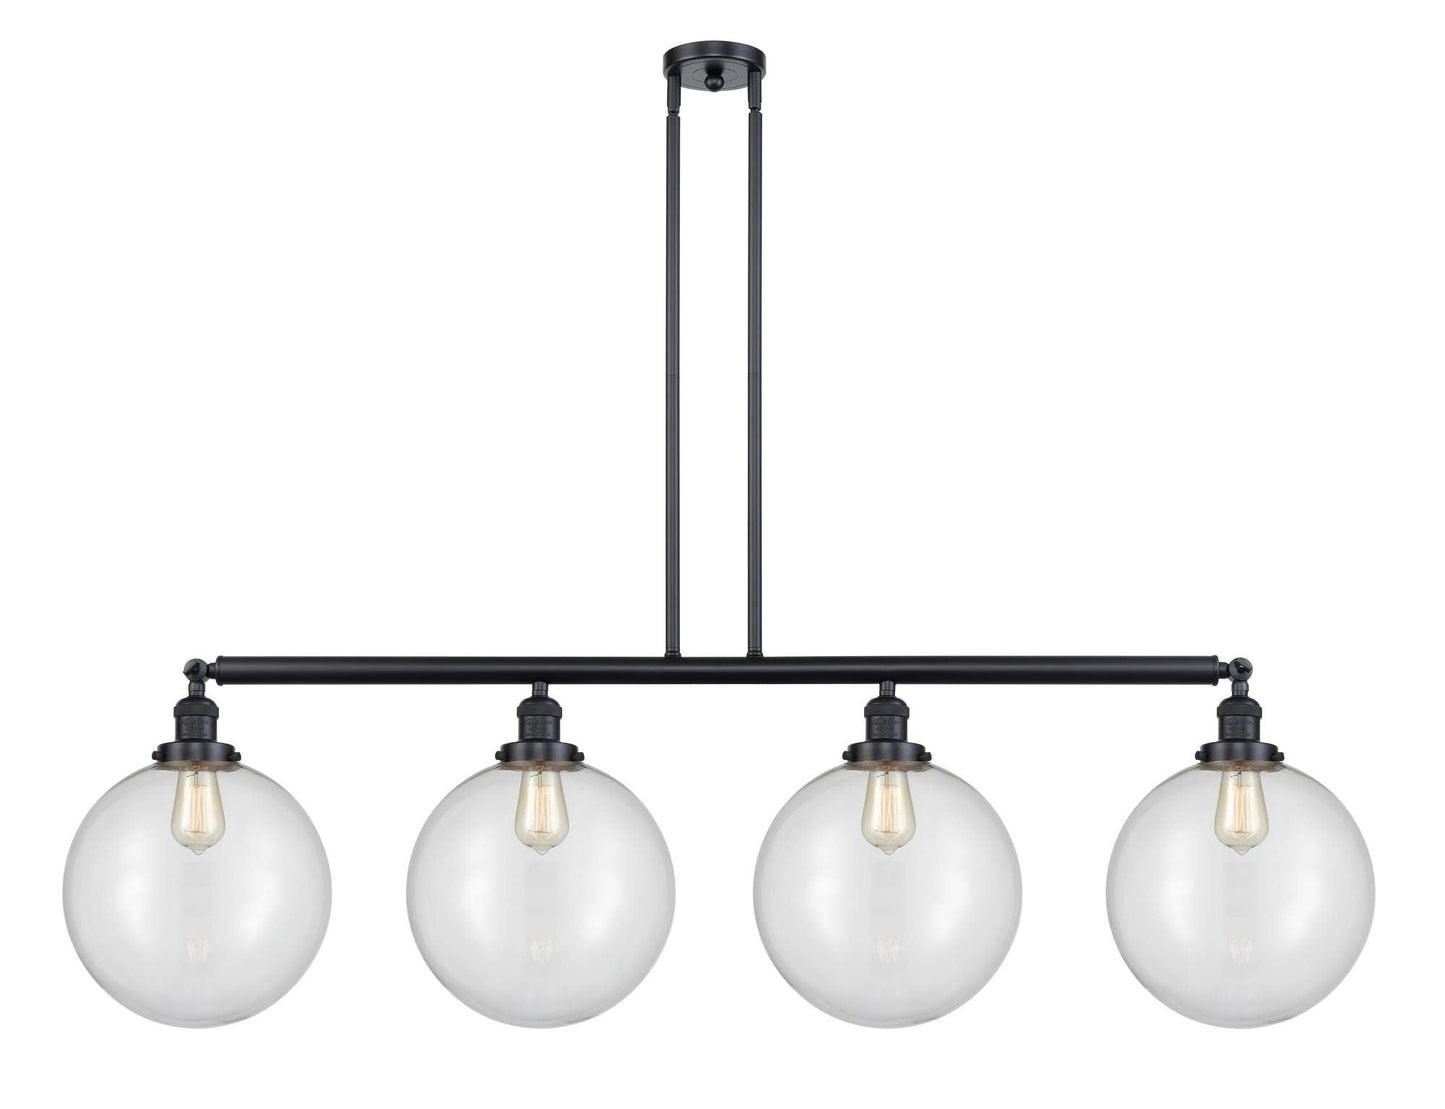 214-BK-G202-12 4-Light 56" Matte Black Island Light - Clear Beacon Glass - LED Bulb - Dimmensions: 56 x 12 x 16<br>Minimum Height : 26<br>Maximum Height : 50 - Sloped Ceiling Compatible: Yes